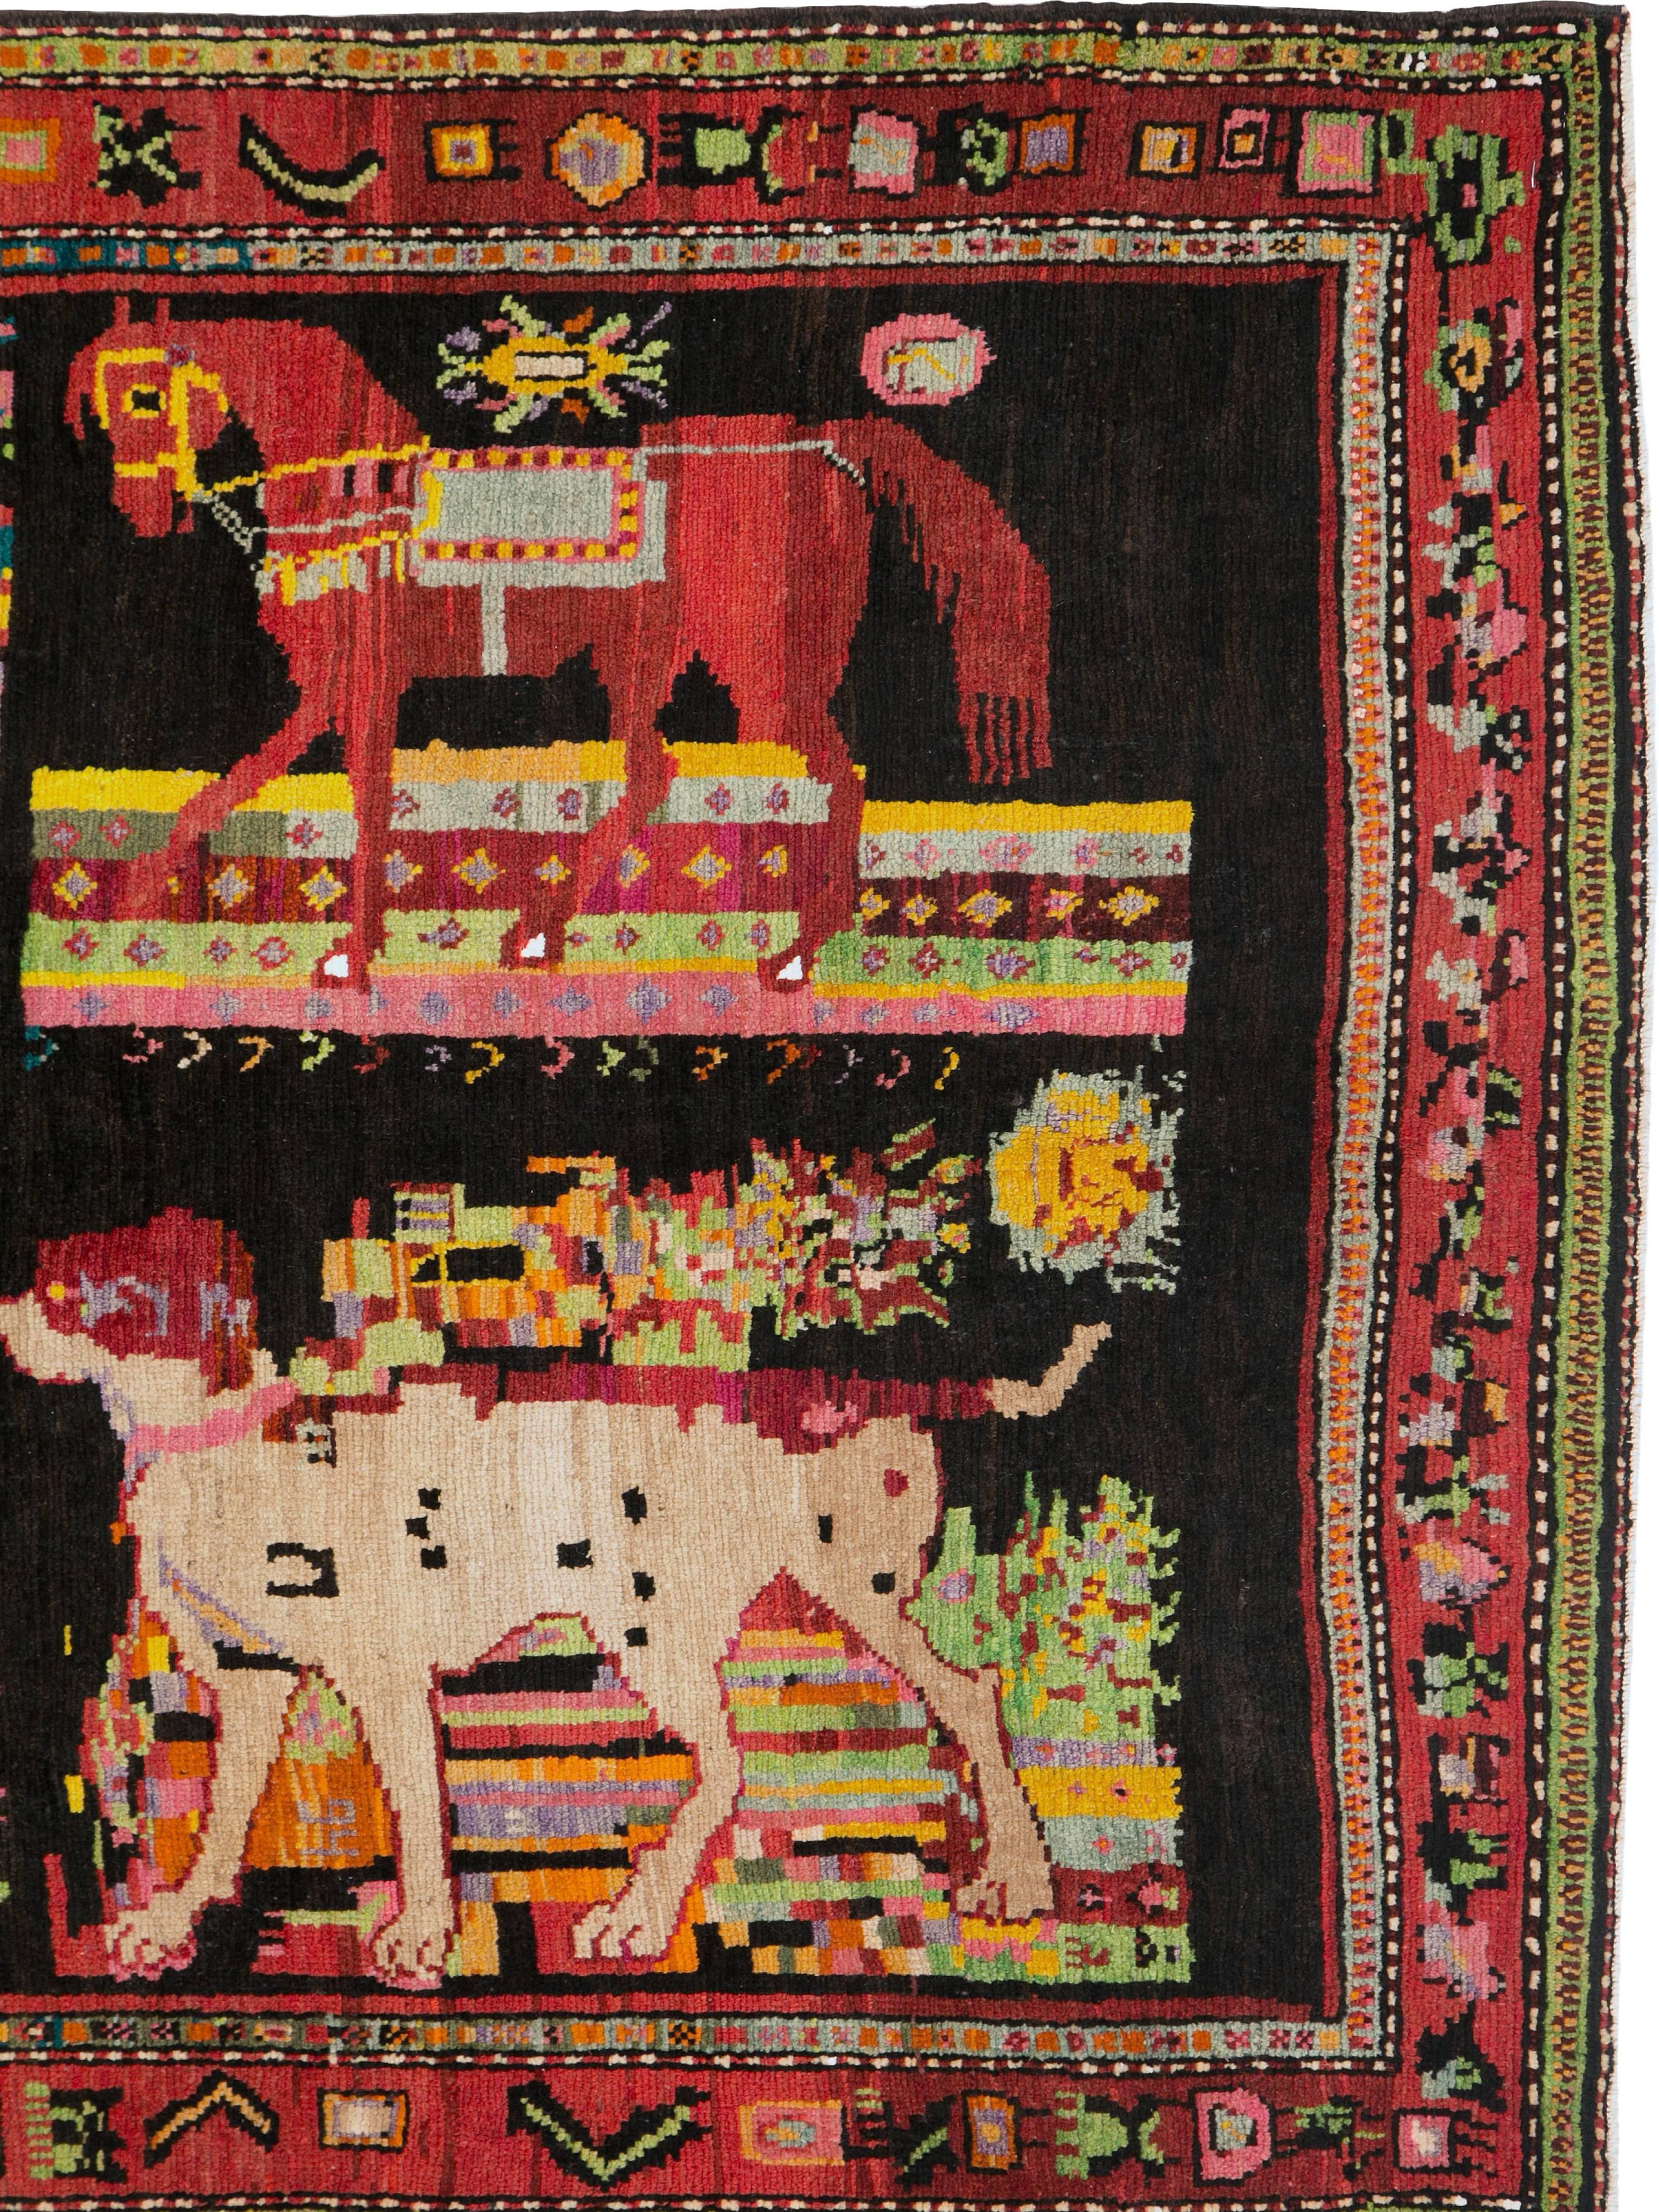 A vintage Russian Karabagh carpet from the mid-20th century with a pictorial design.